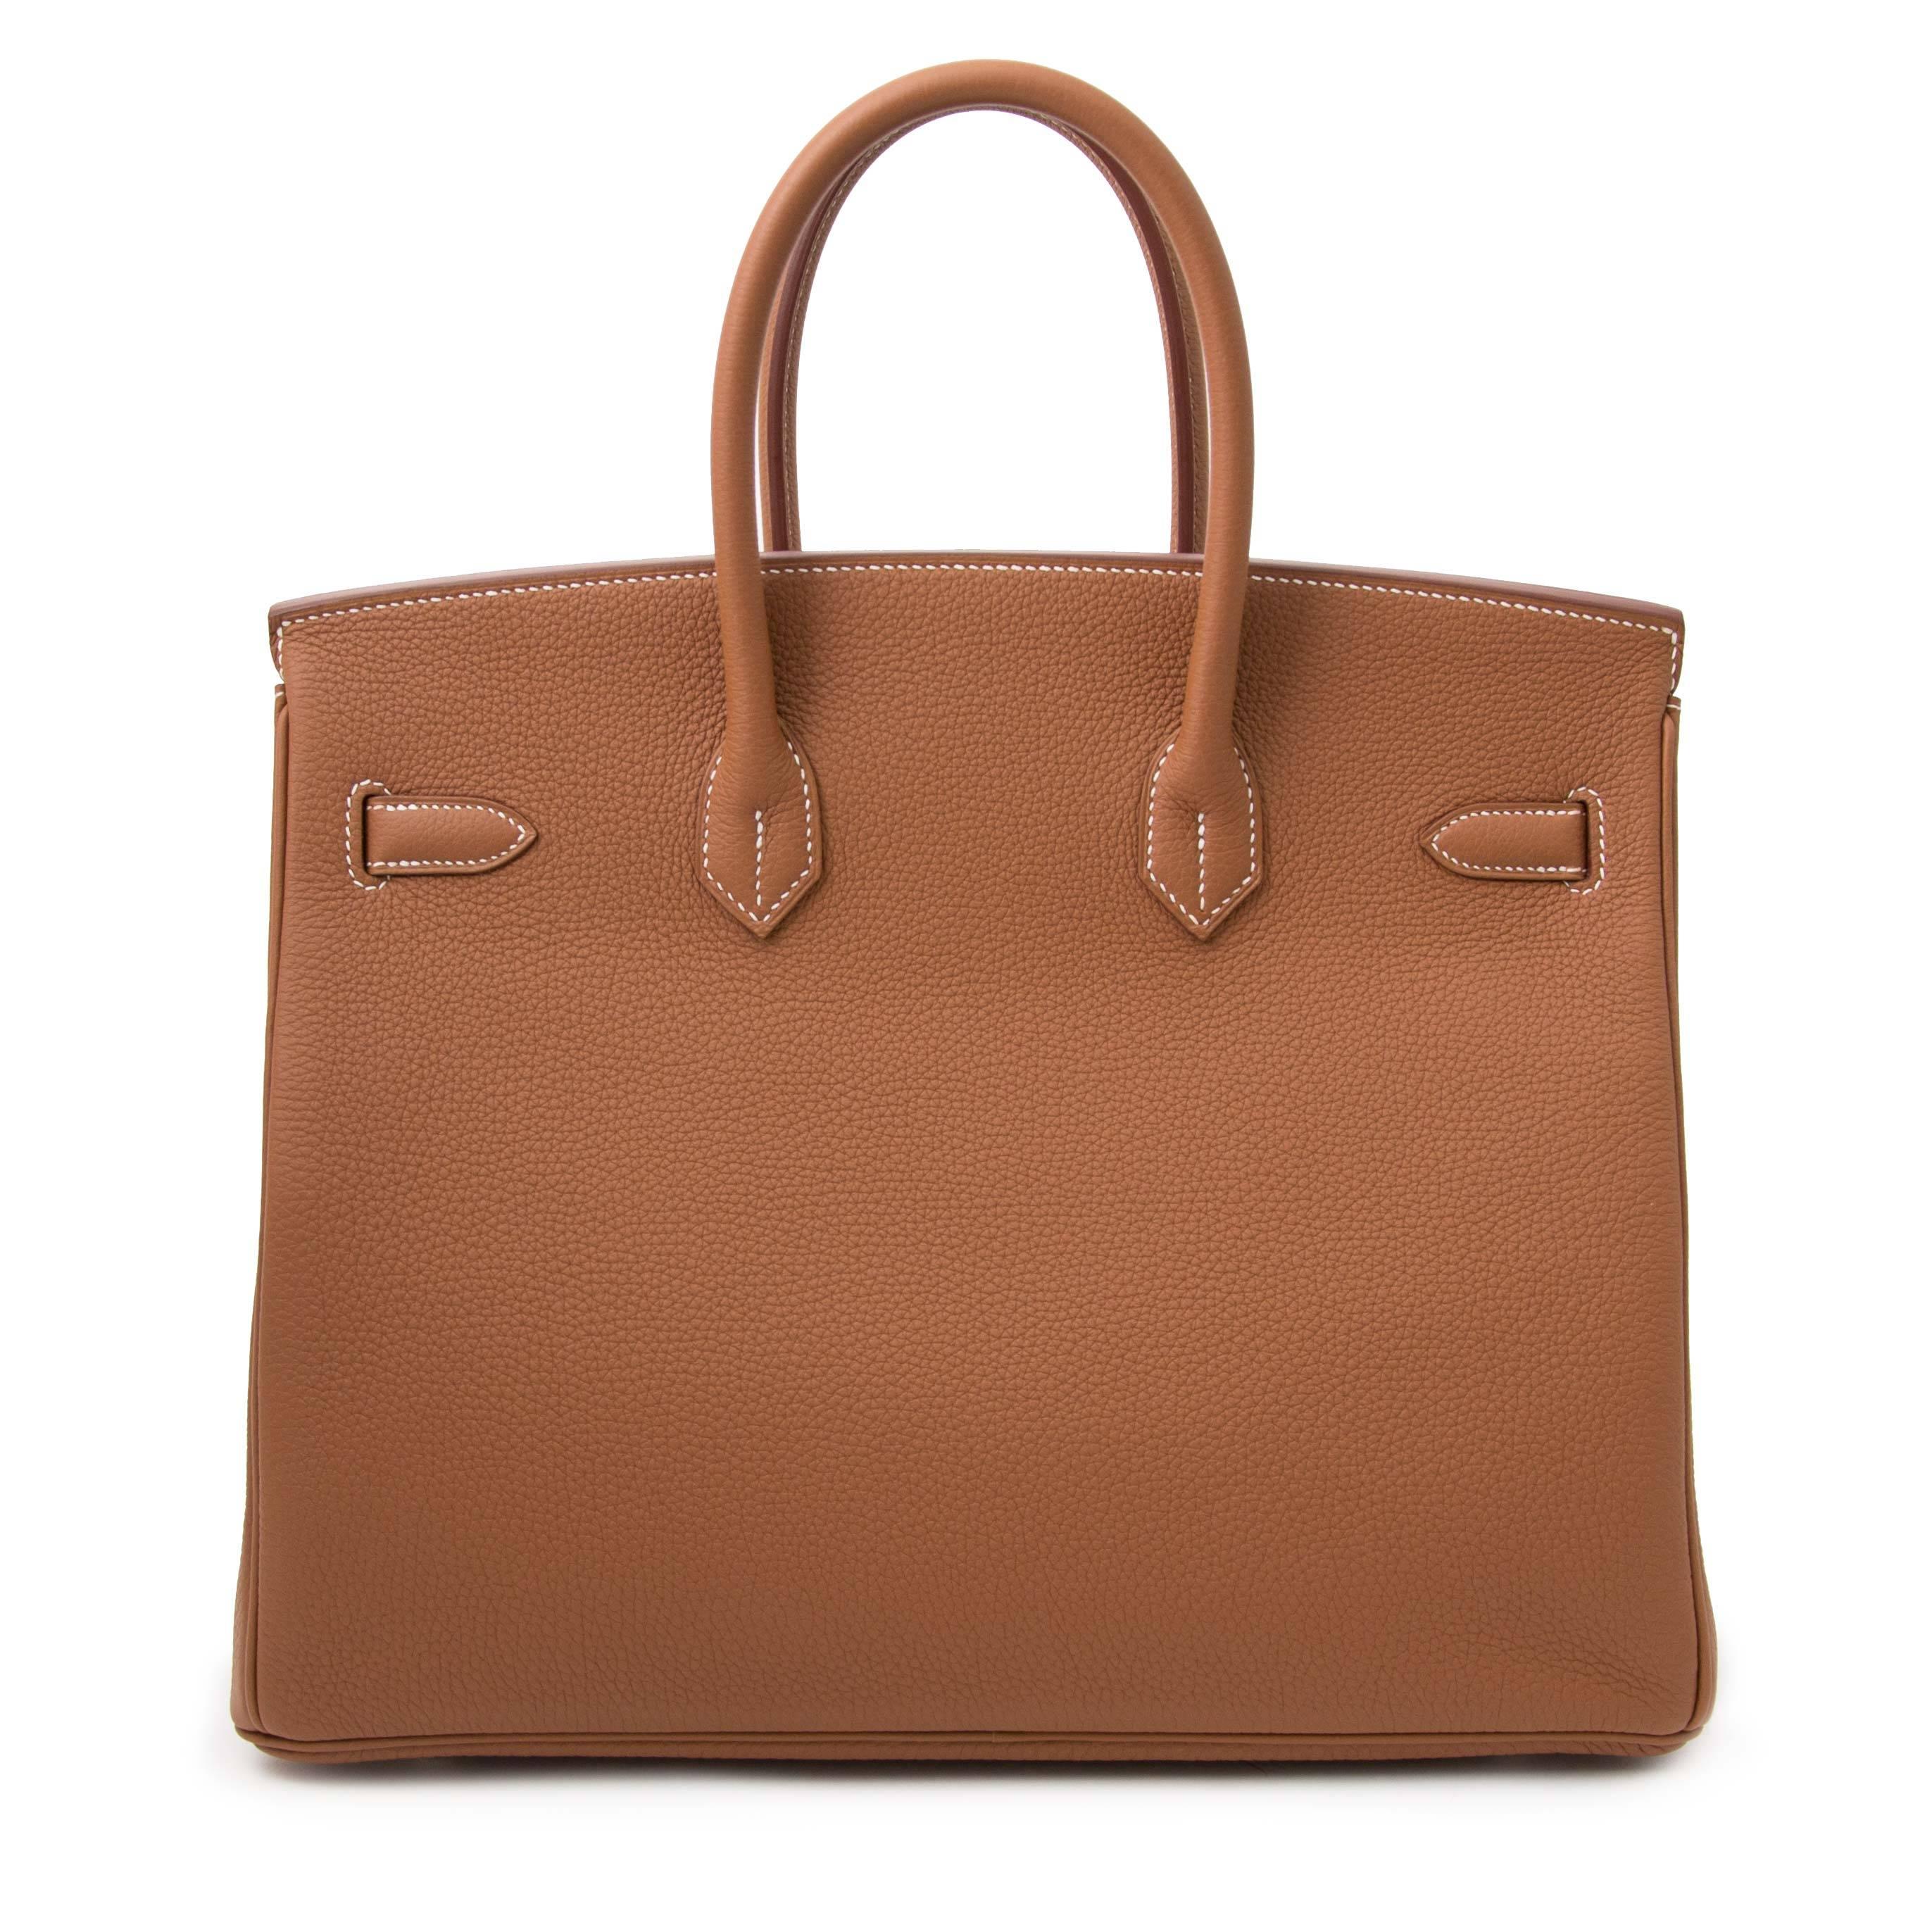 'Gold' is one of Hermès classiest and timeless color. It goes with everything as it's perfect neutral color.
The bag is made out of smooth togo leather and is accentuated with palladium hardware. 
Treat yourself with this beautiful Birkin and get